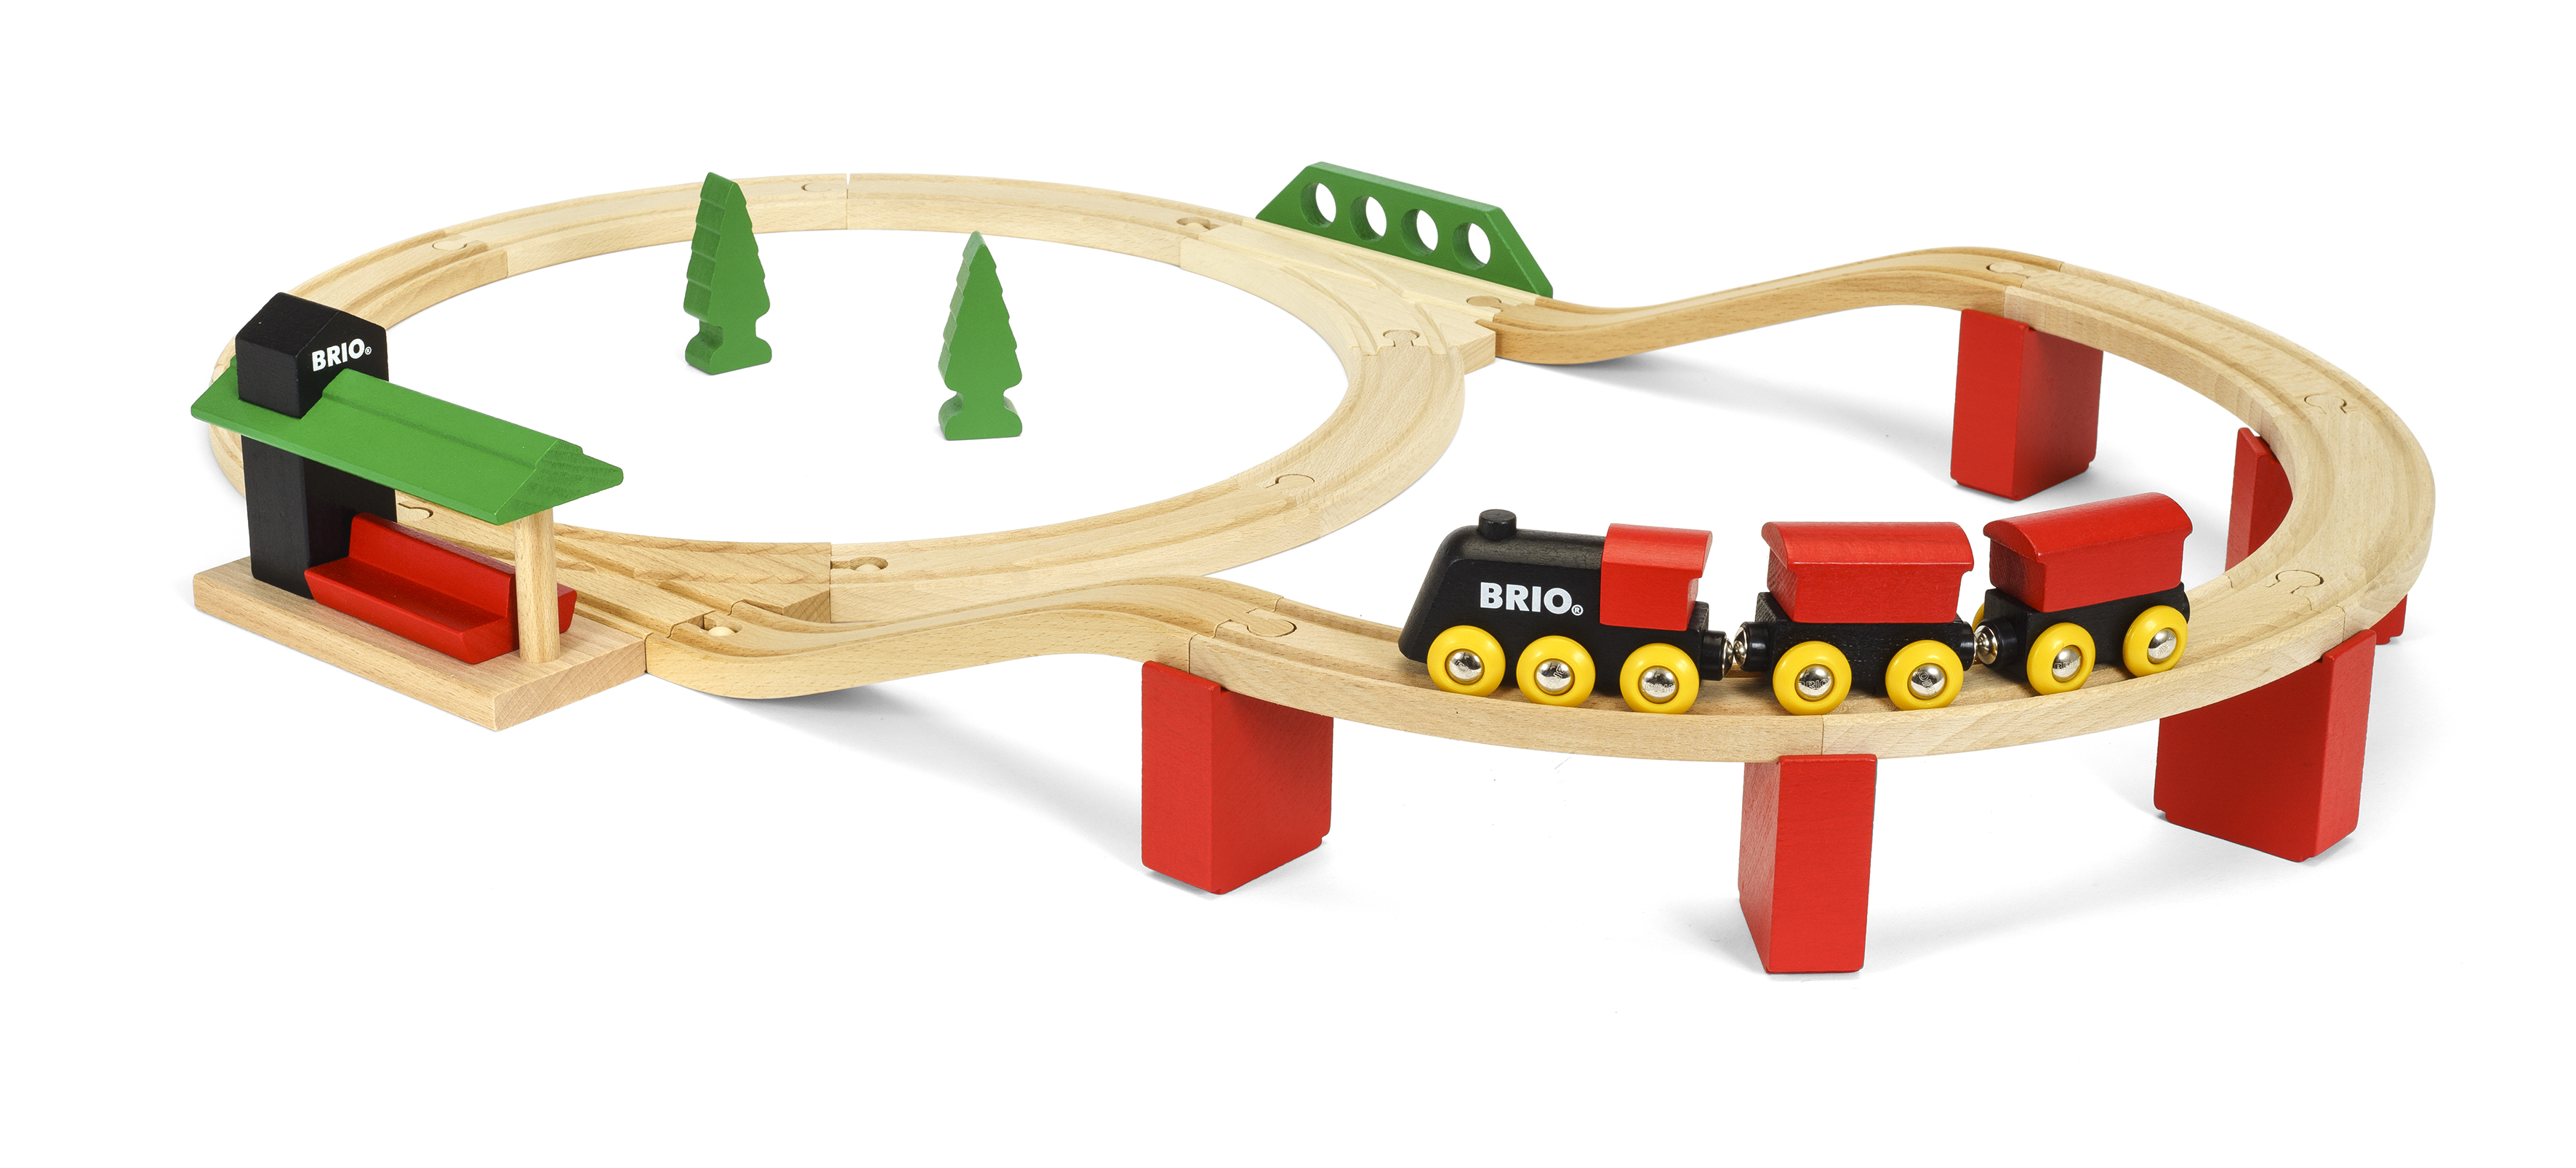 BRIO World Classic Deluxe Wooden Railway Train Set - Ages 2+ - image 2 of 4